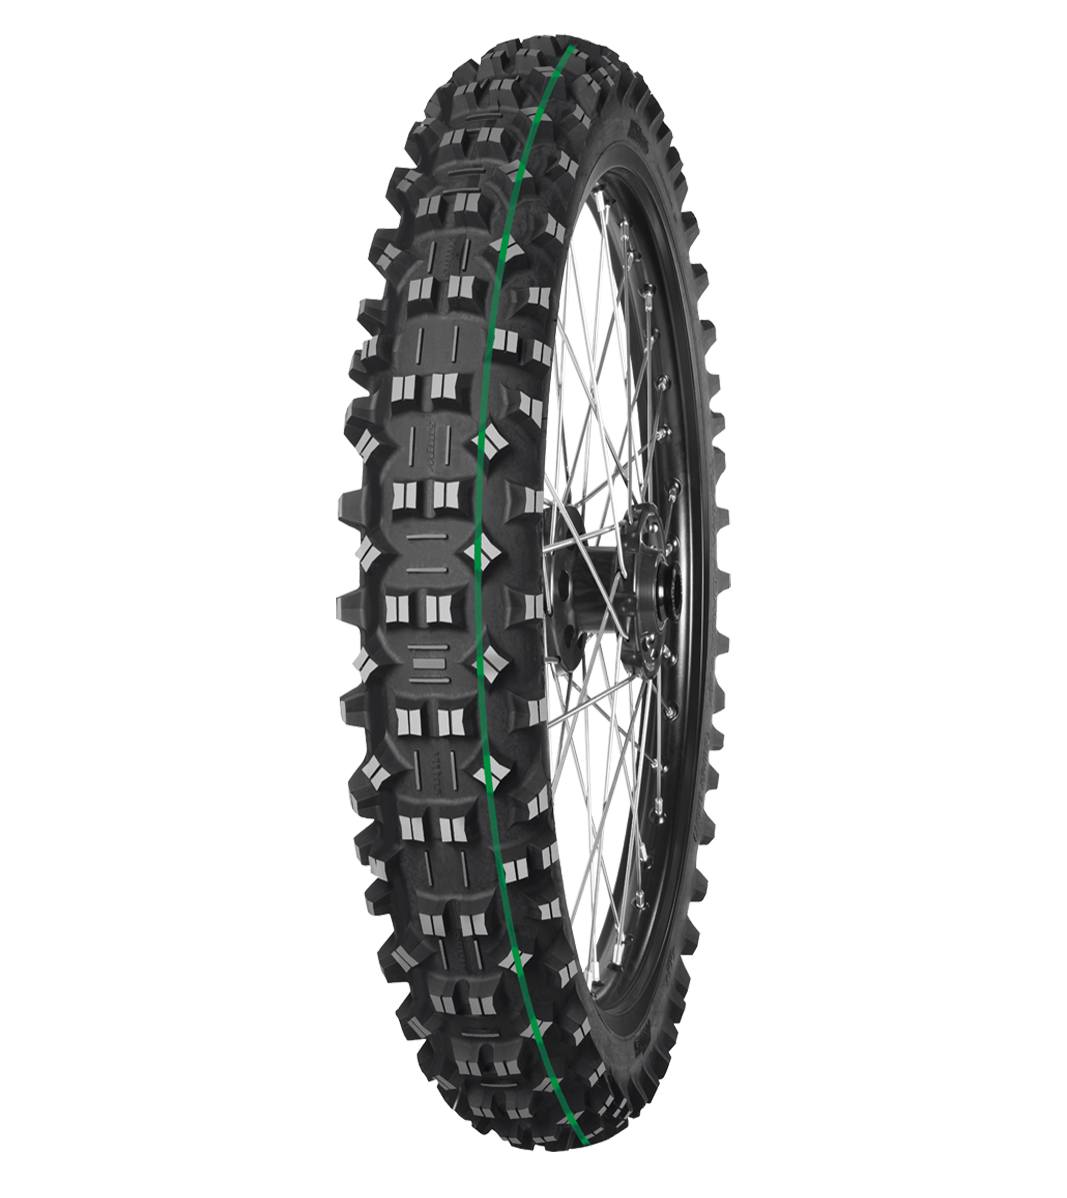 Mitas TERRA FORCE-EF 90/100-21 Enduro Competition Off-Road SUPER LIGHT 57R Green Tube Front Tire, 226744, 90/100-21, Enduro Competition, Front, Off-Road, Terra Force, Terra Force-EF, Trail, Tires - Imported and distributed in North &amp; South America by Lindeco Genuine Powersports - Premier Powersports Equipment and Accessories for Motorcycle Enthusiasts, Professional Riders and Dealers.